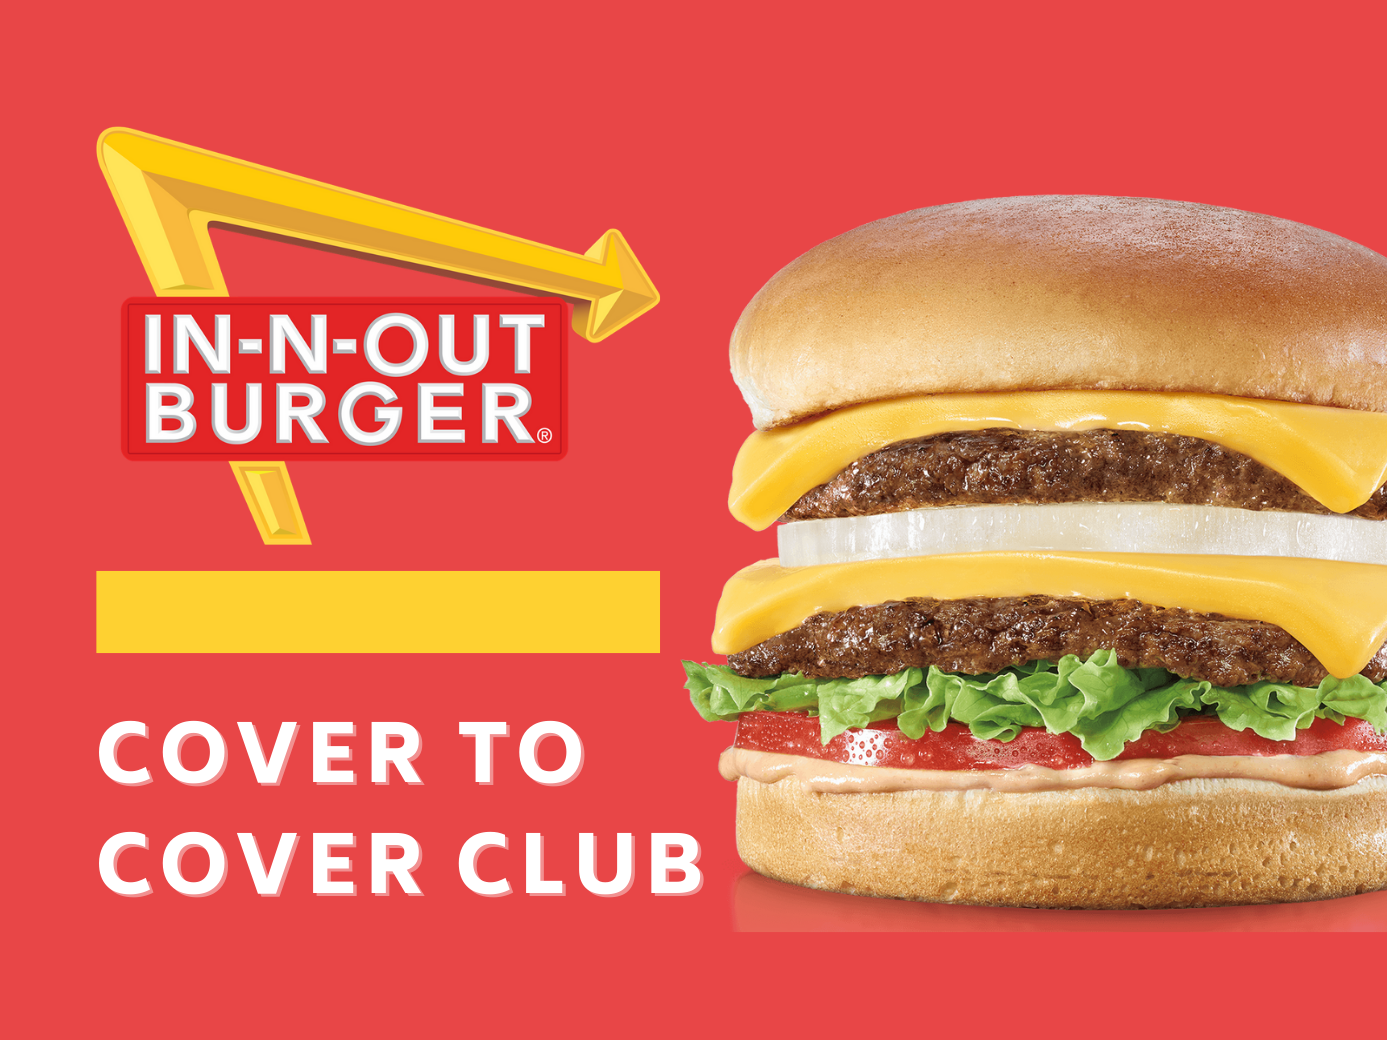 In-N-Out Burger logo with Cover to Cover Club text and cheeseburger